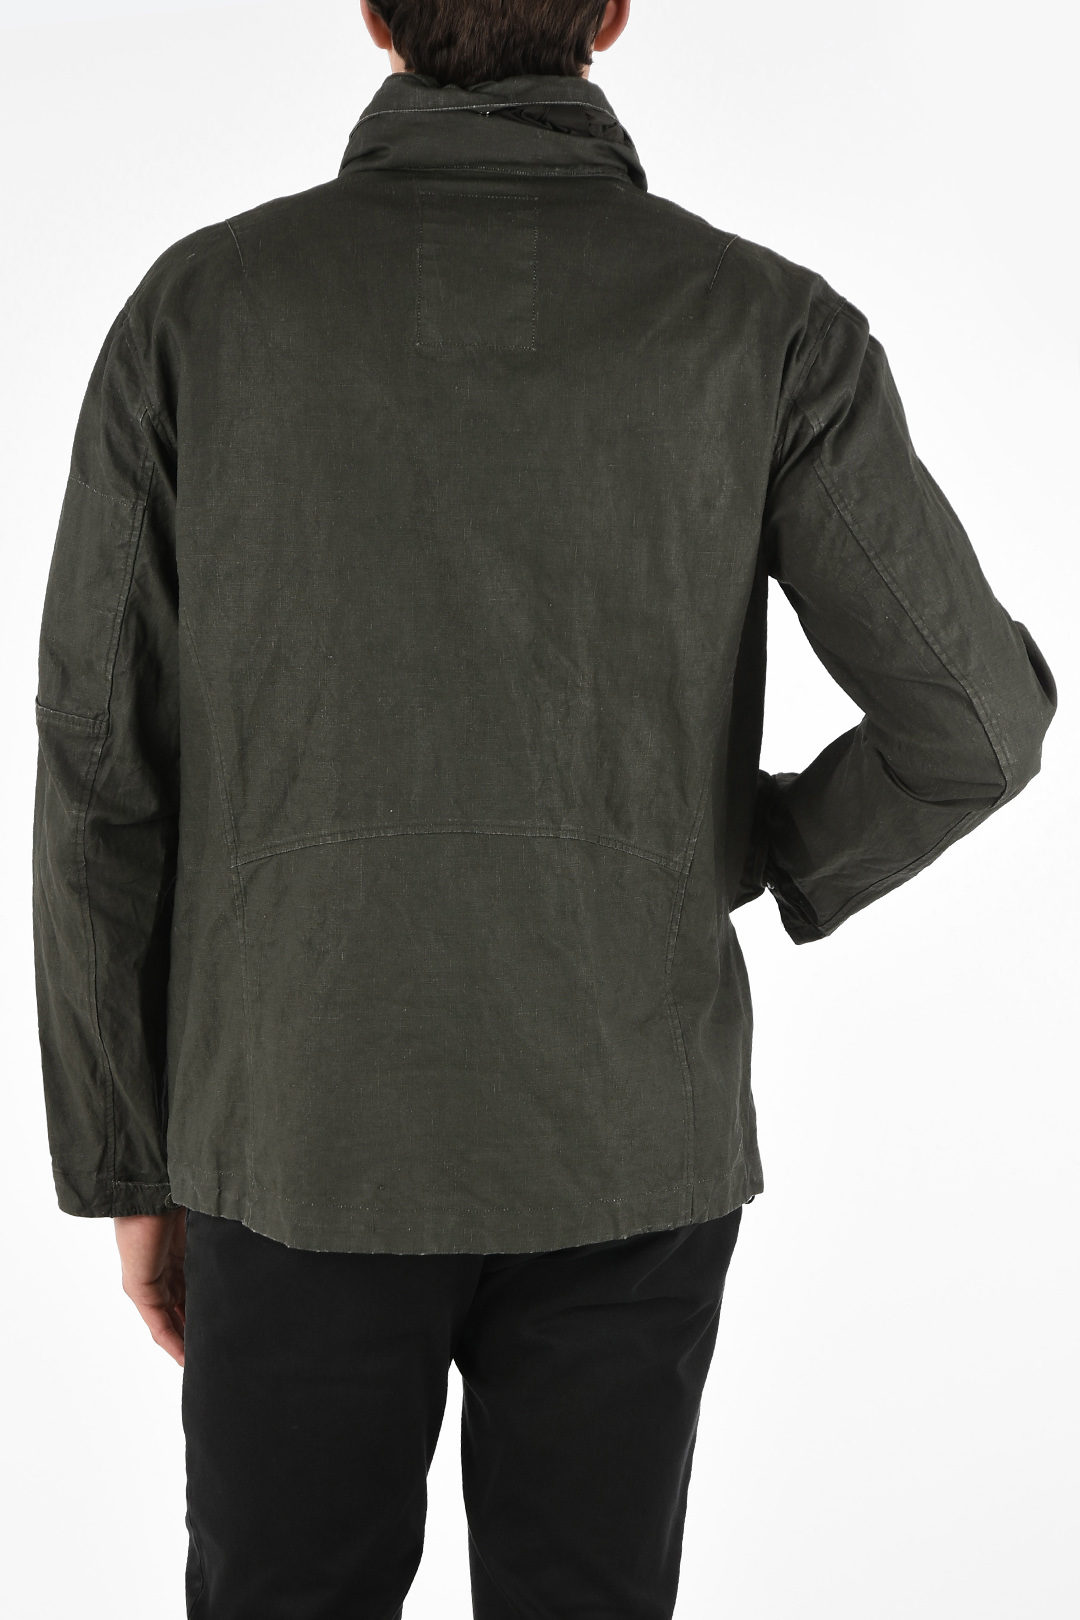 CP Company flax jacket with Extractable Hood men - Glamood Outlet